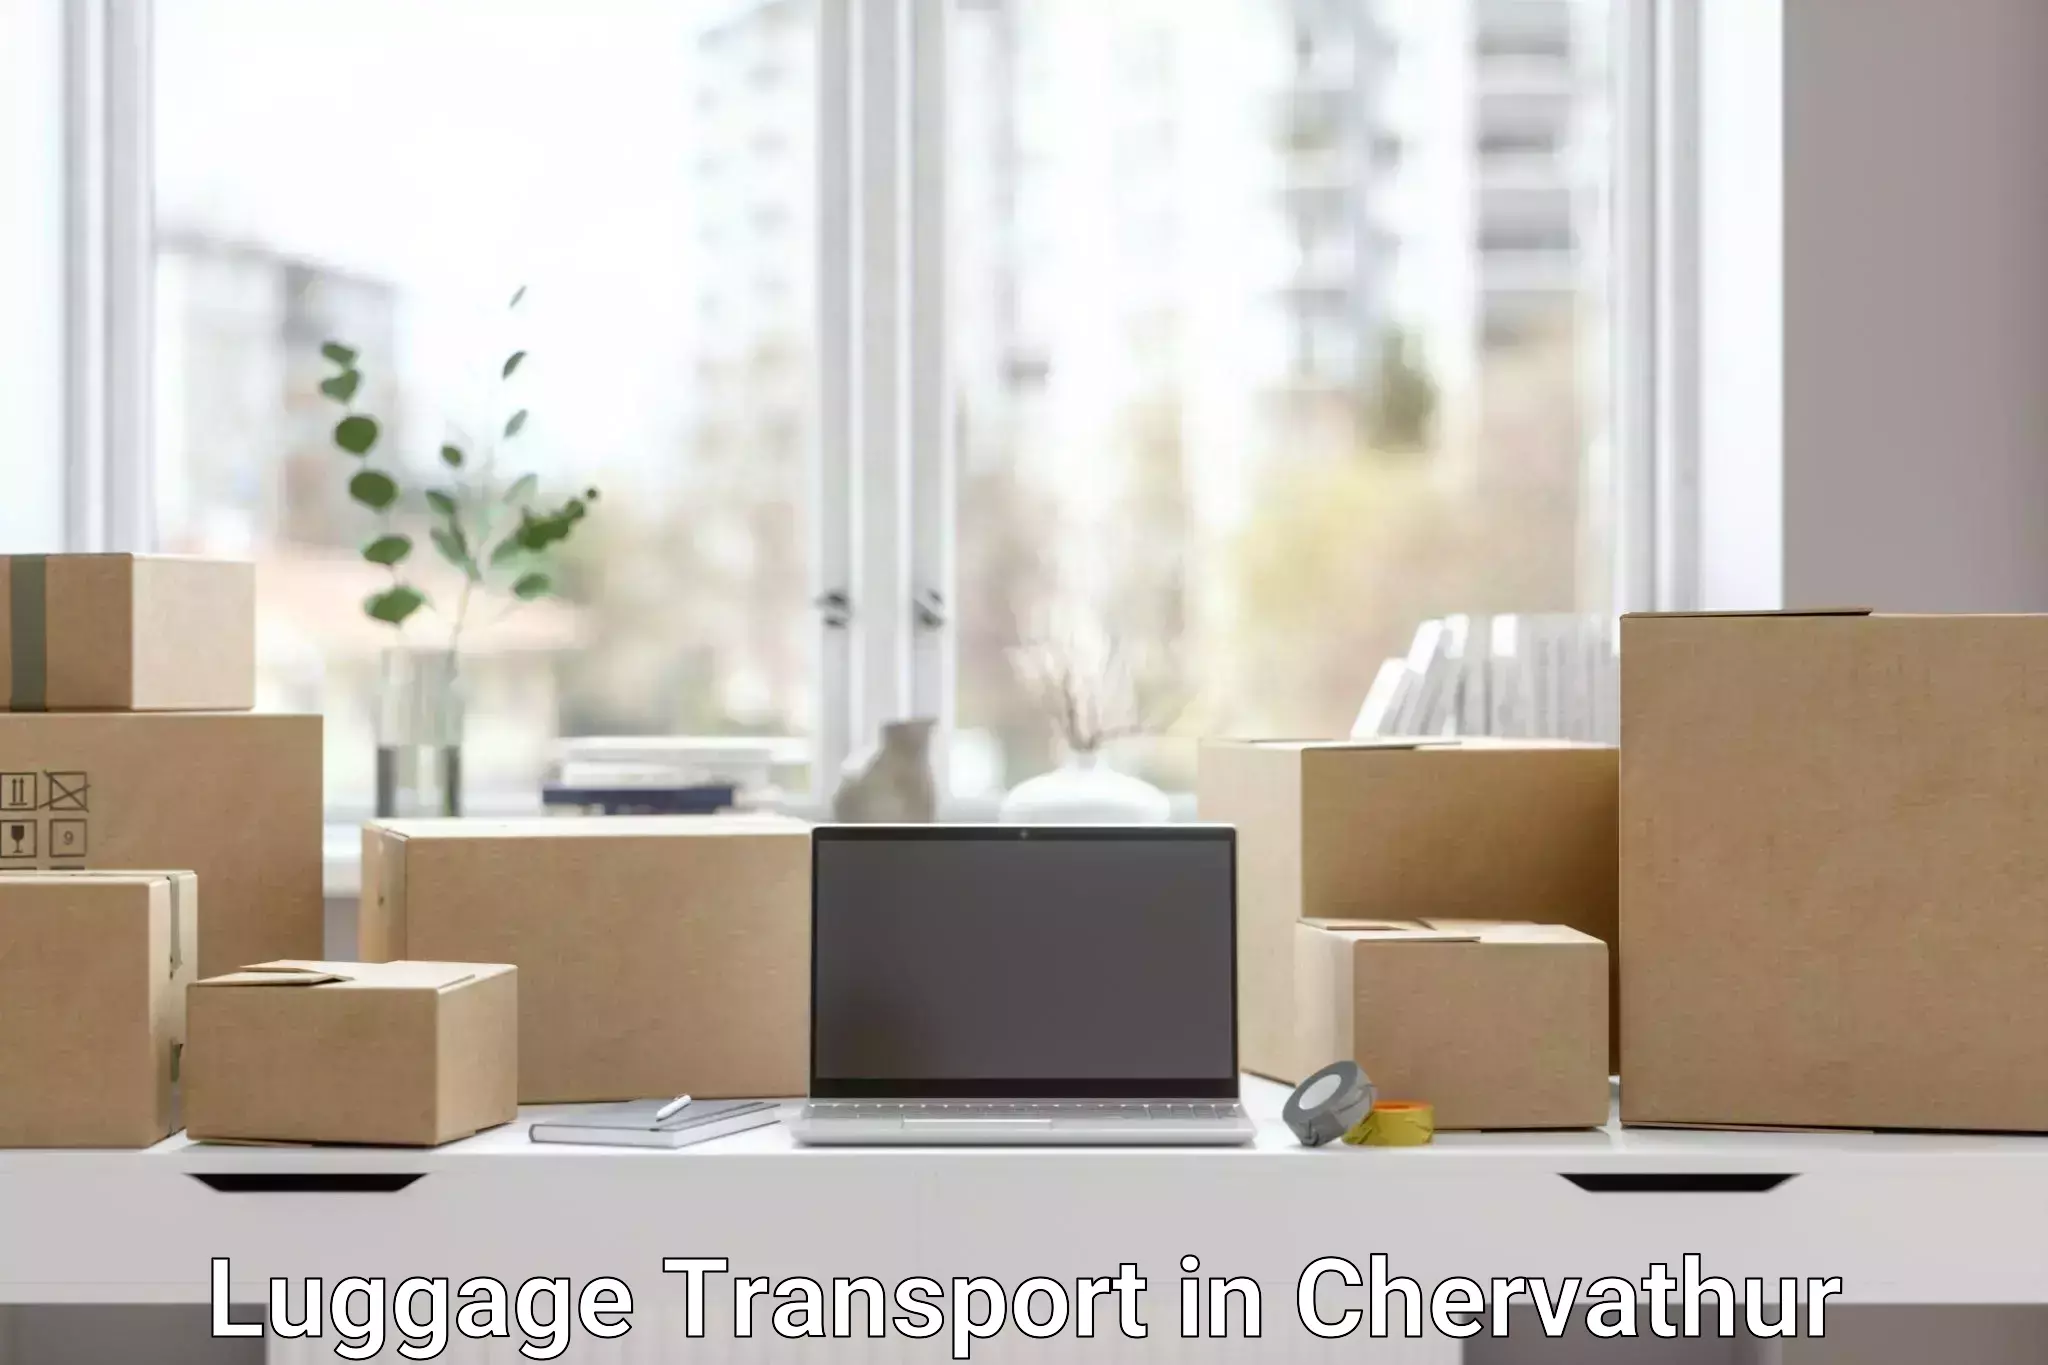 Luggage transport schedule in Chervathur